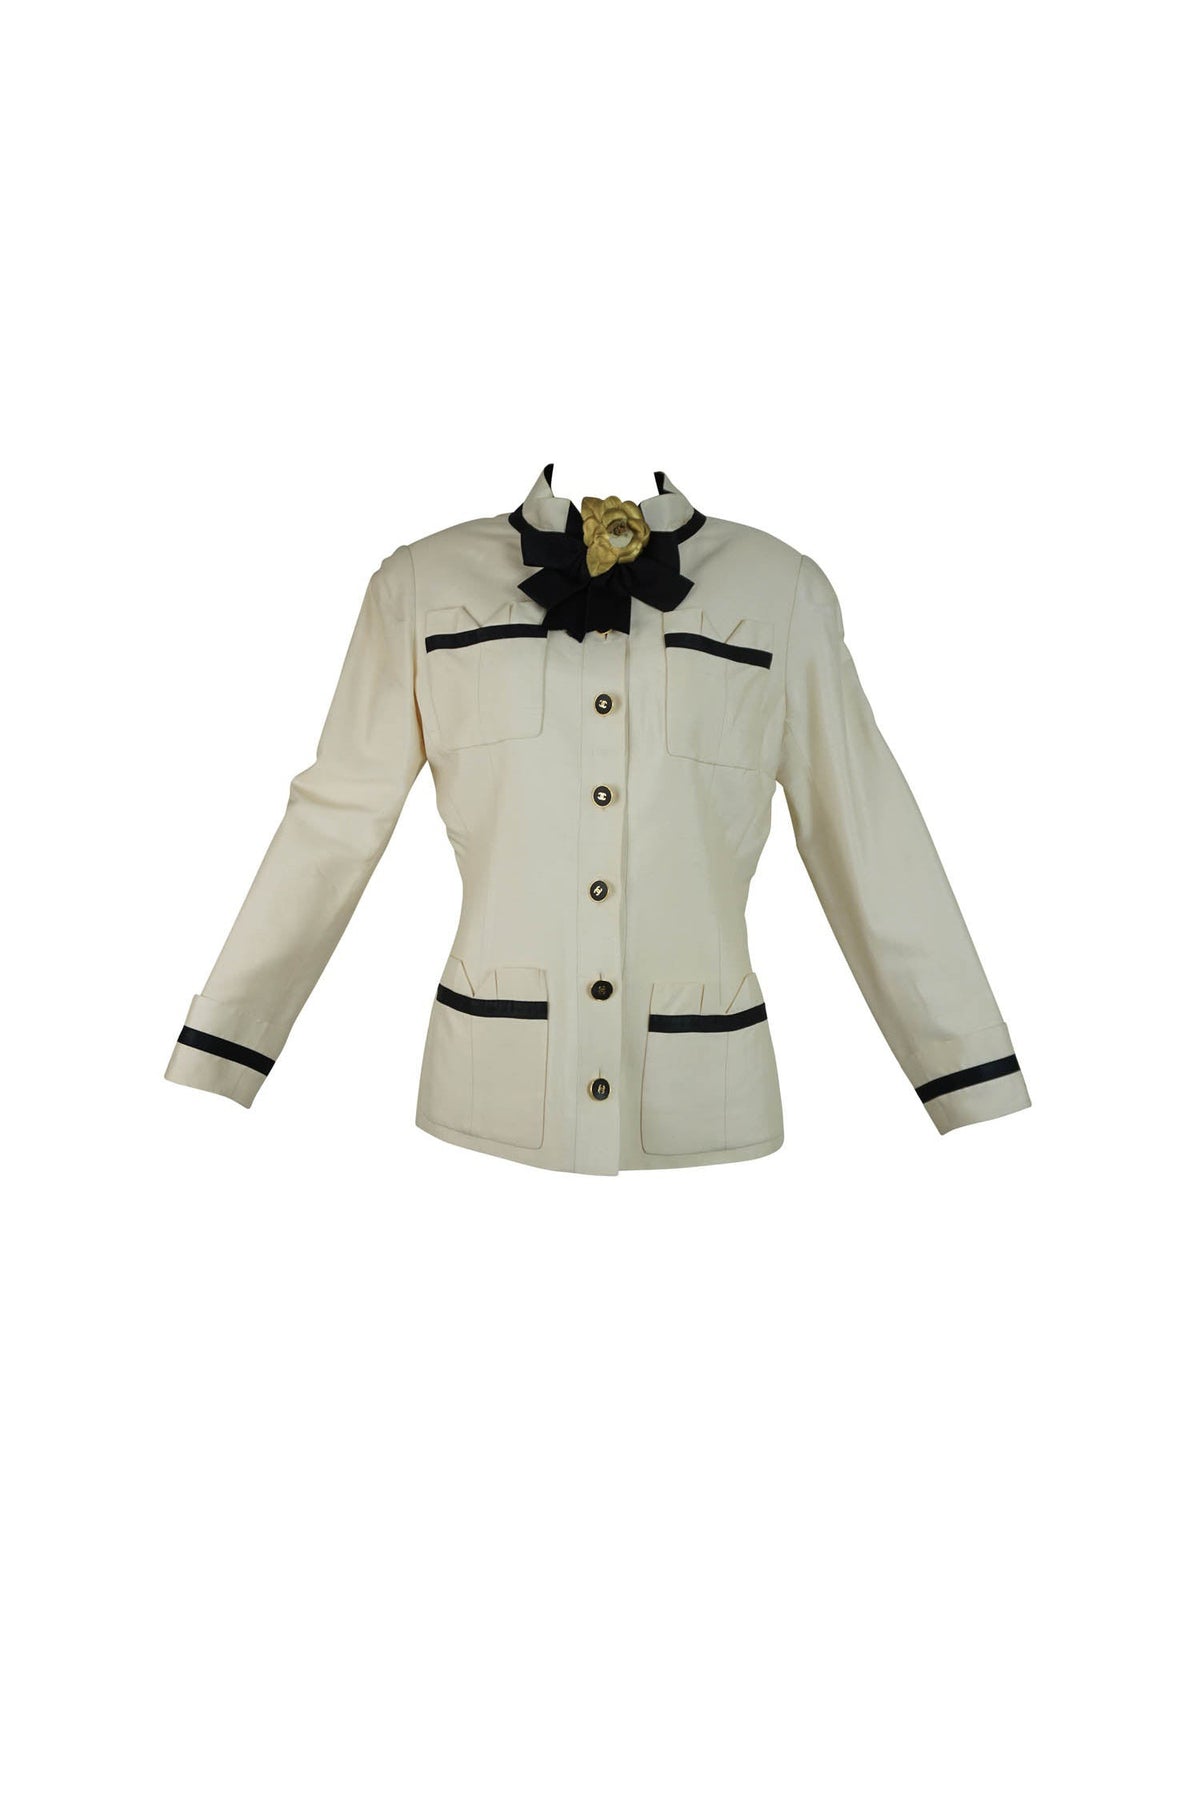 Foxy Couture Carmel Chanel CC Button Jacket Camelia Bow 1980s